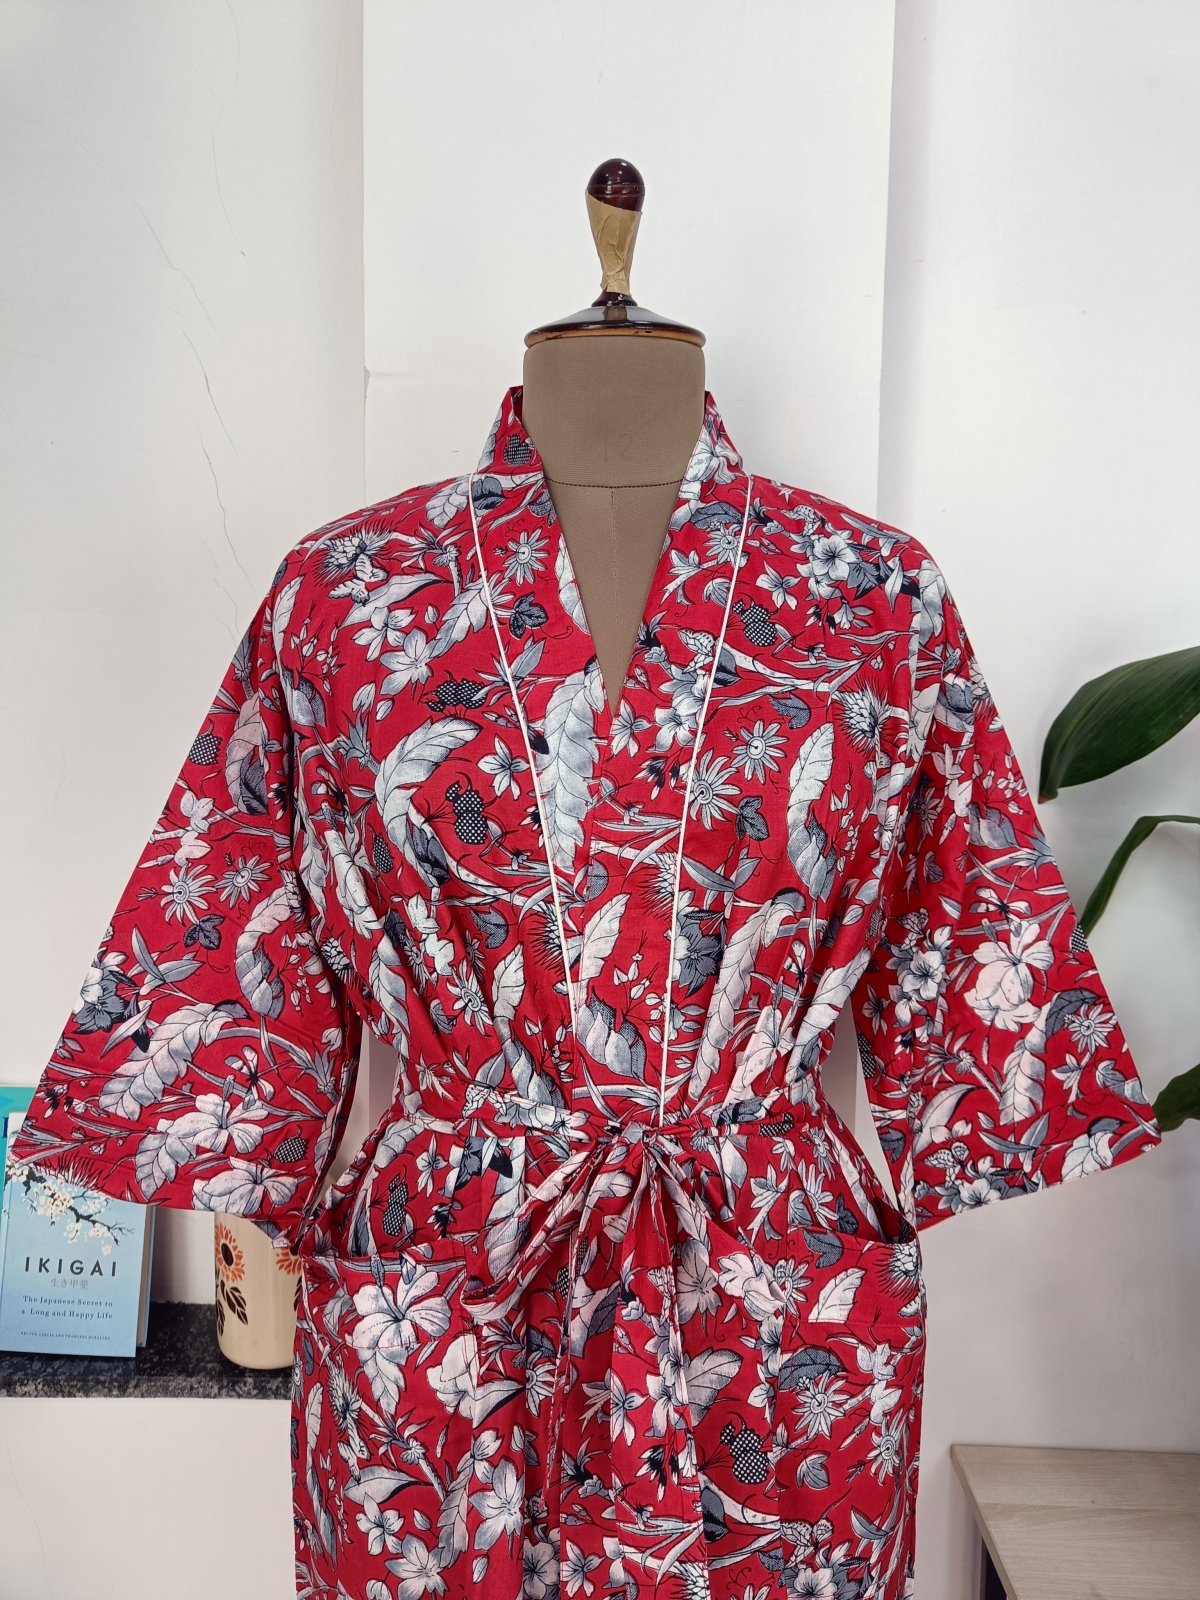 Boho Cotton Kimono House Robe Indian Handprinted Red Wild Floral Chic | Lightweight Summer Luxury Beach Holiday Cover Up Stunning Bride Dres - The Eastern Loom